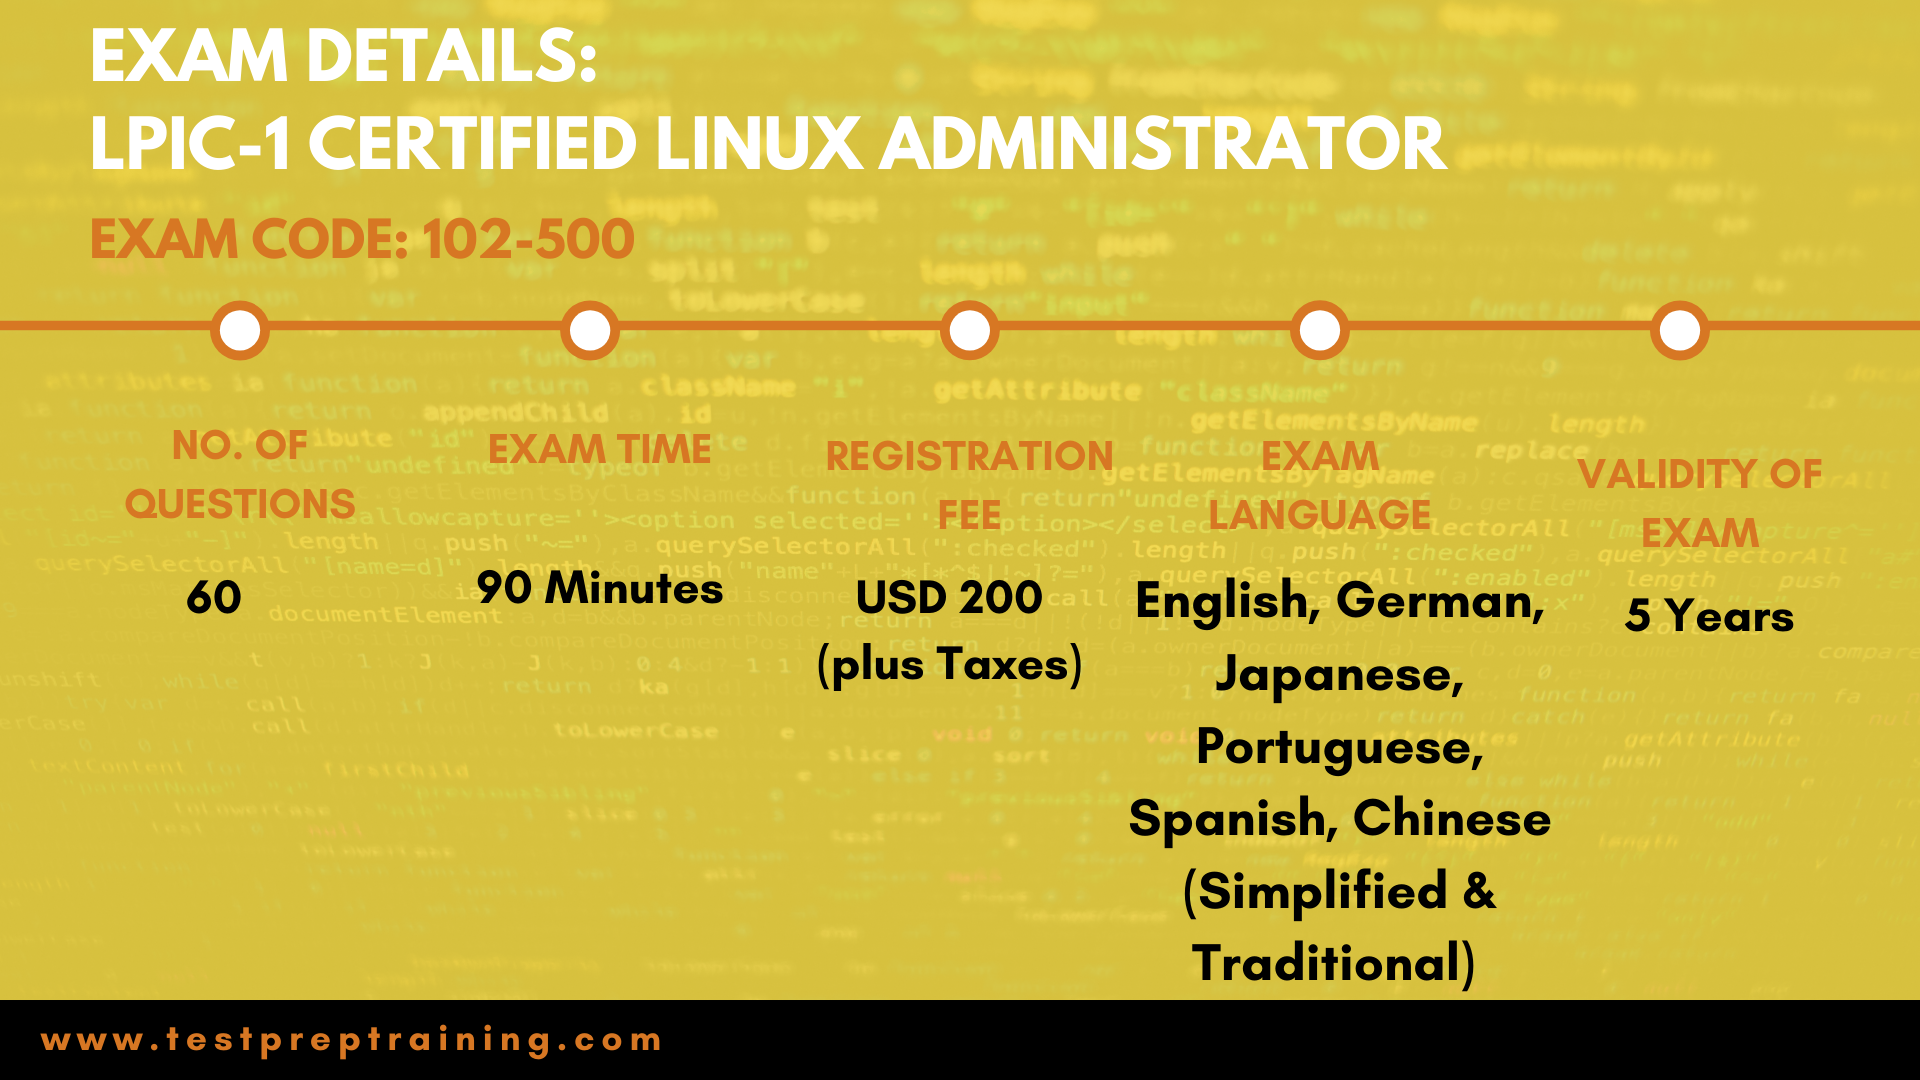 Certified Linux Administrator 102-500 BASIC DETAILS